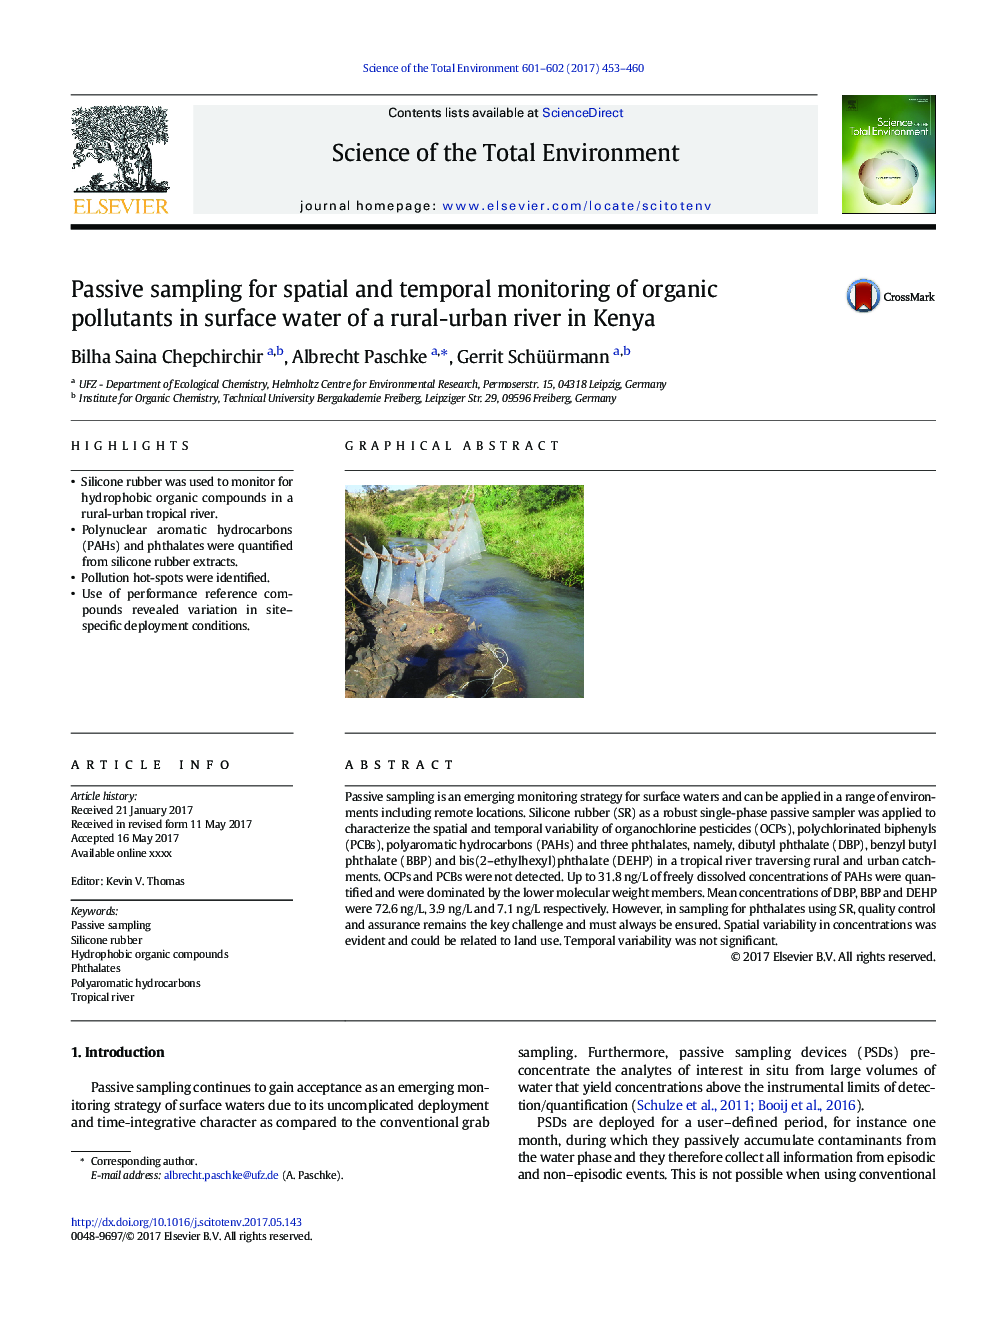 Passive sampling for spatial and temporal monitoring of organic pollutants in surface water of a rural-urban river in Kenya